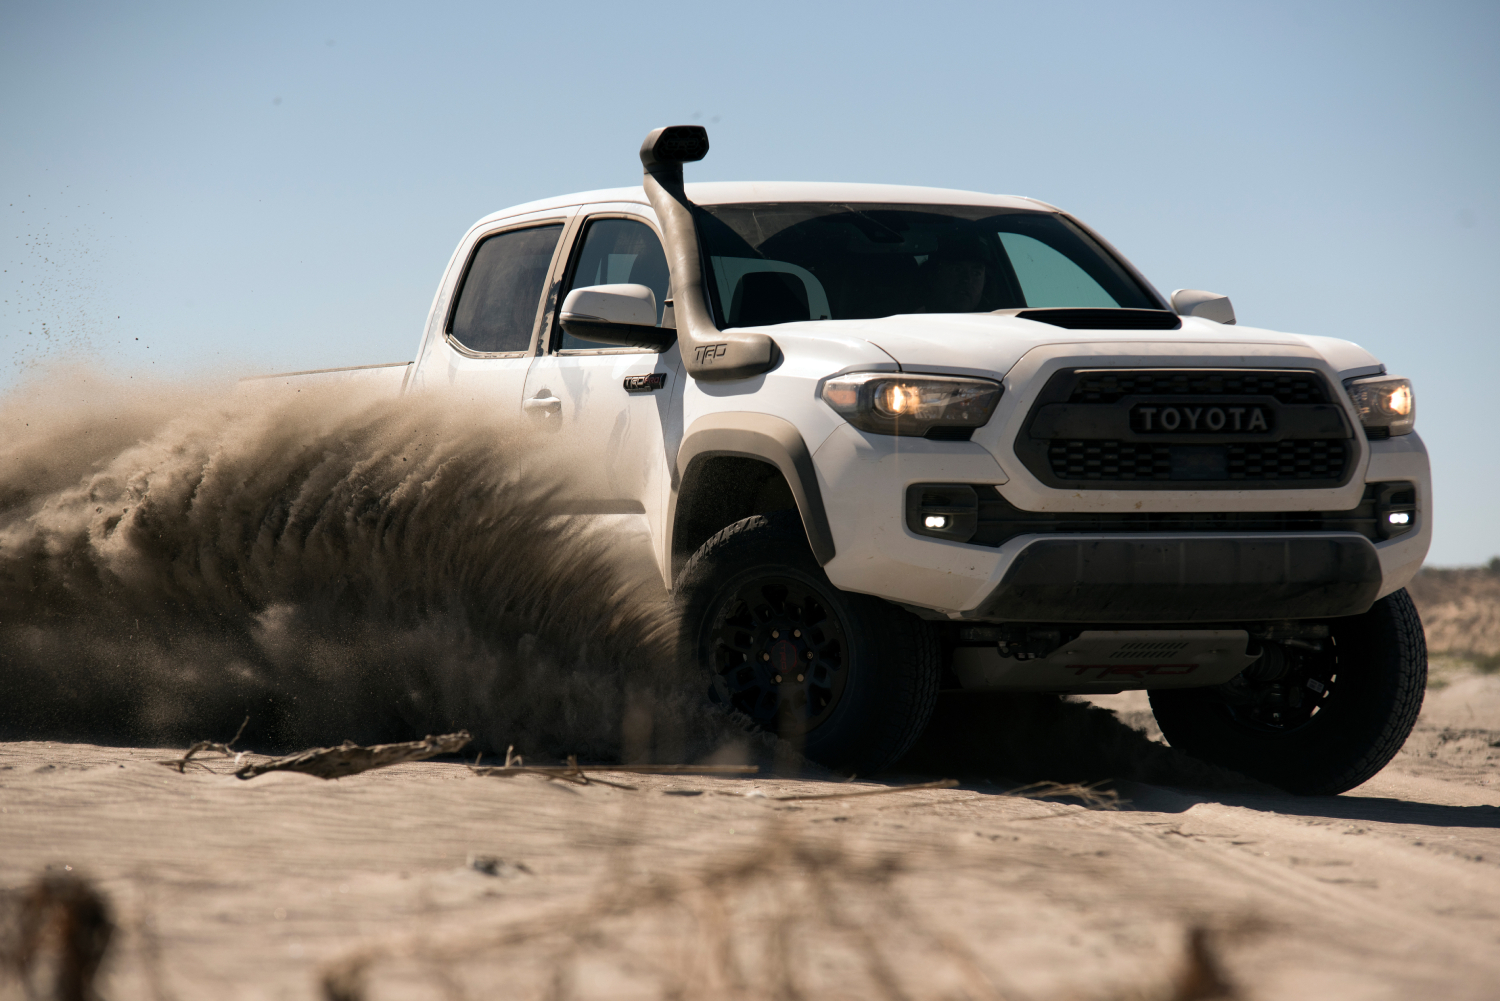 The 2019 Toyota Tacoma has reliability issues